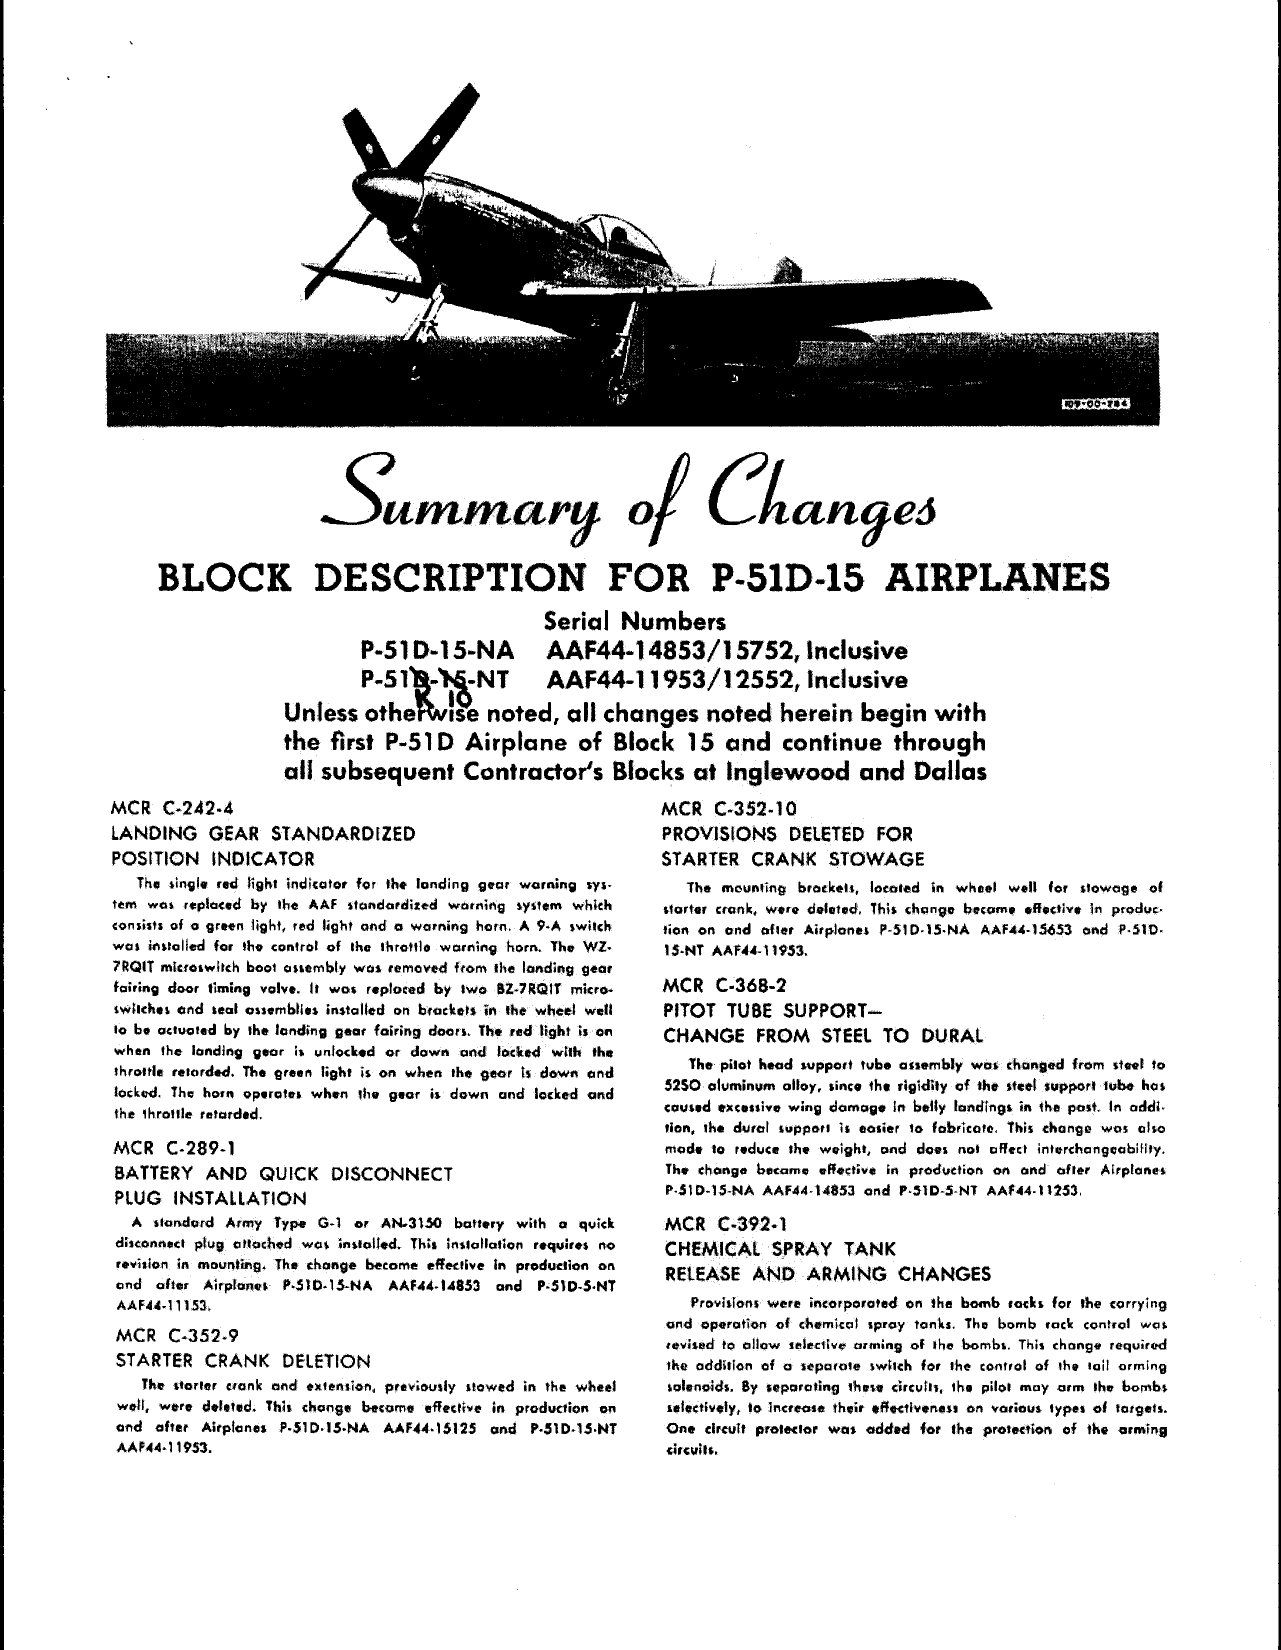 Sample page 1 from AirCorps Library document: Summary of Changes - Block Description for P-51D-15 Airplanes